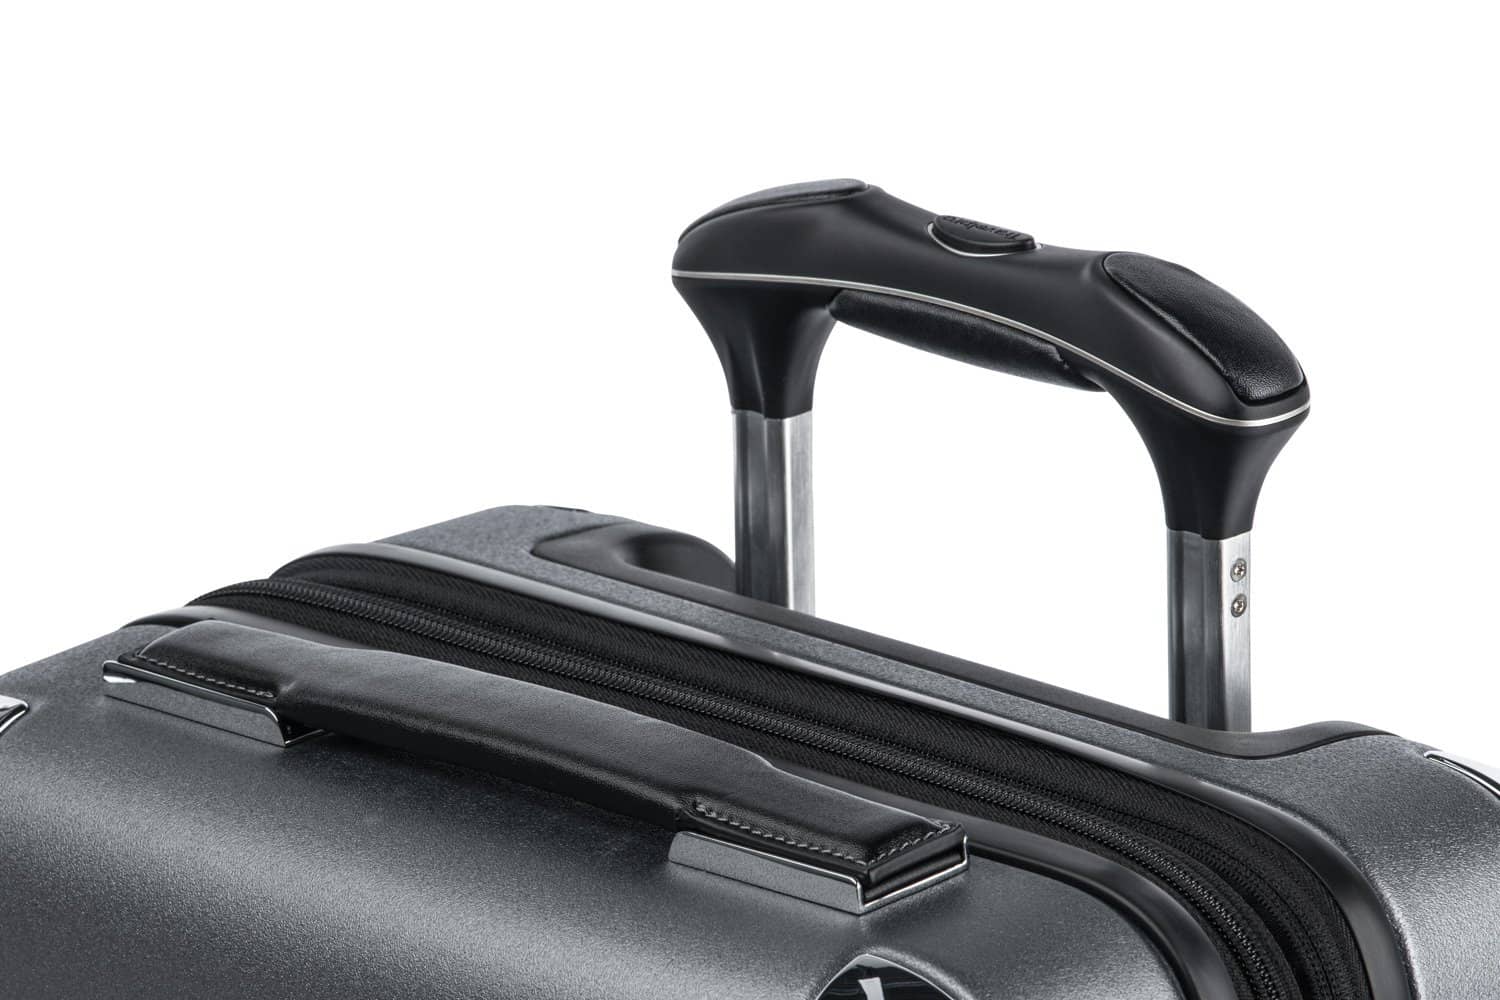 TRAVELPRO Pilot Air™ Elite 21 Expandable Carry-on Spinner Luggage